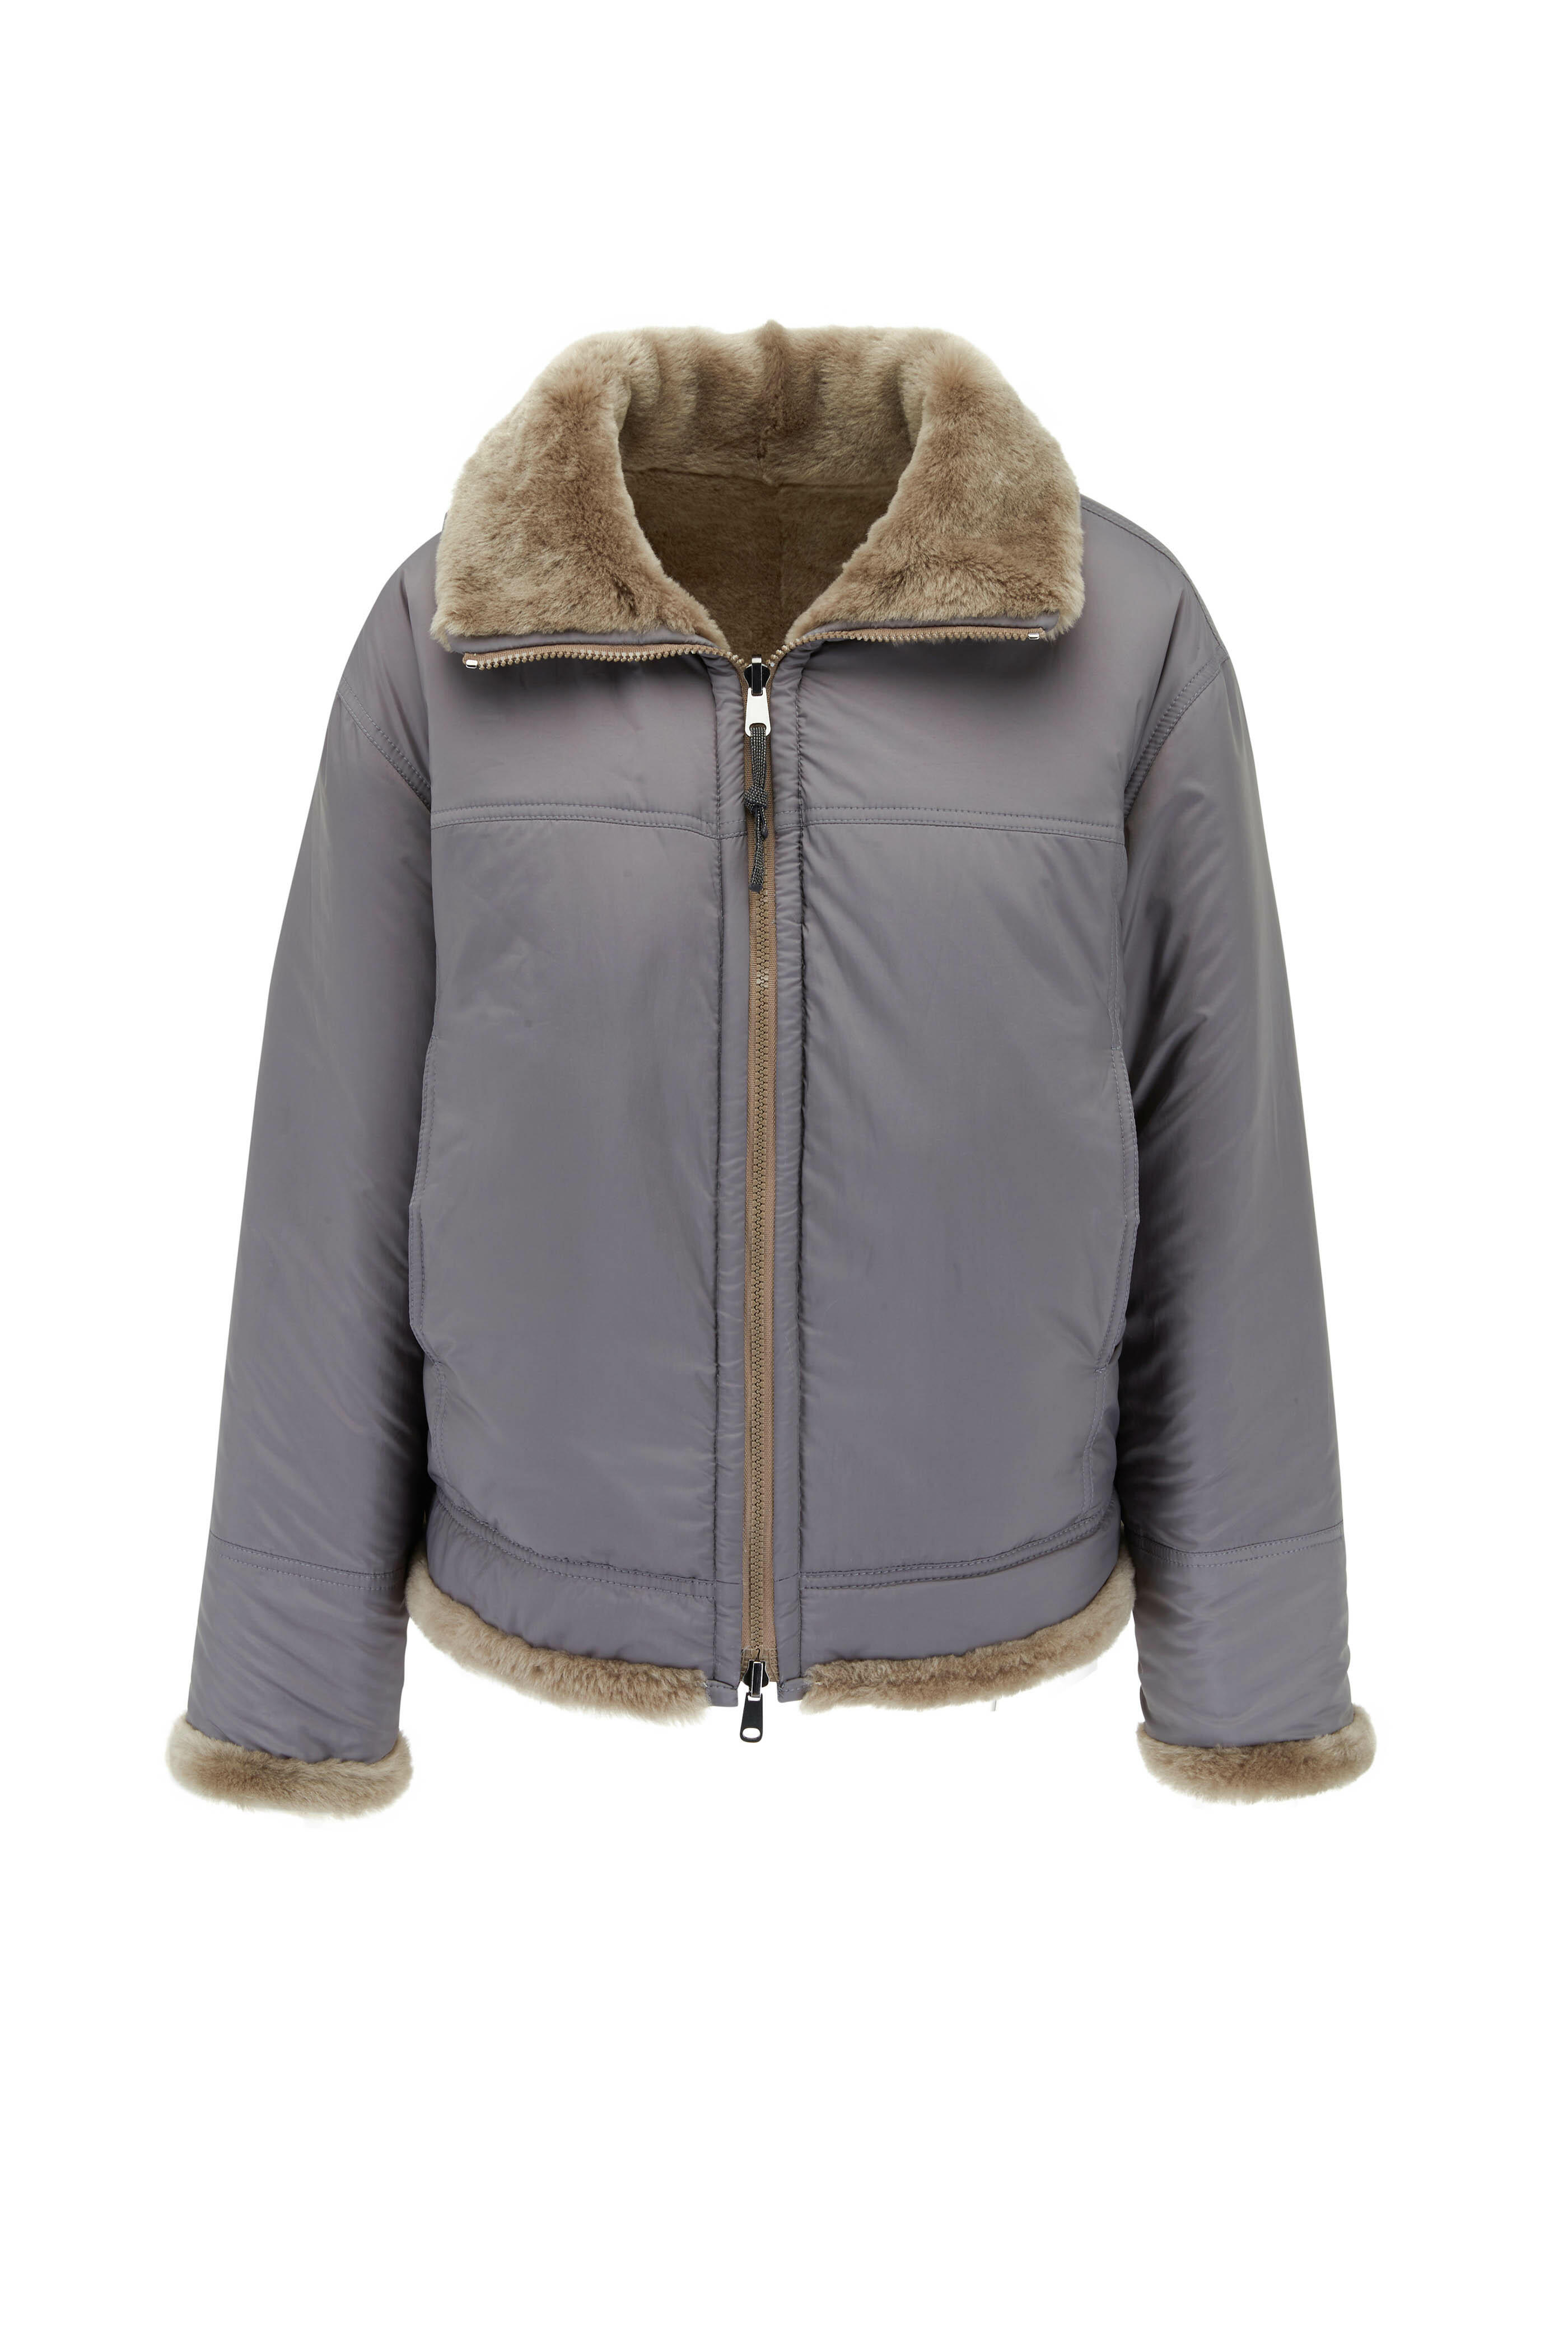 Brunello Cucinelli - Reversible Leather & Shearling Jacket